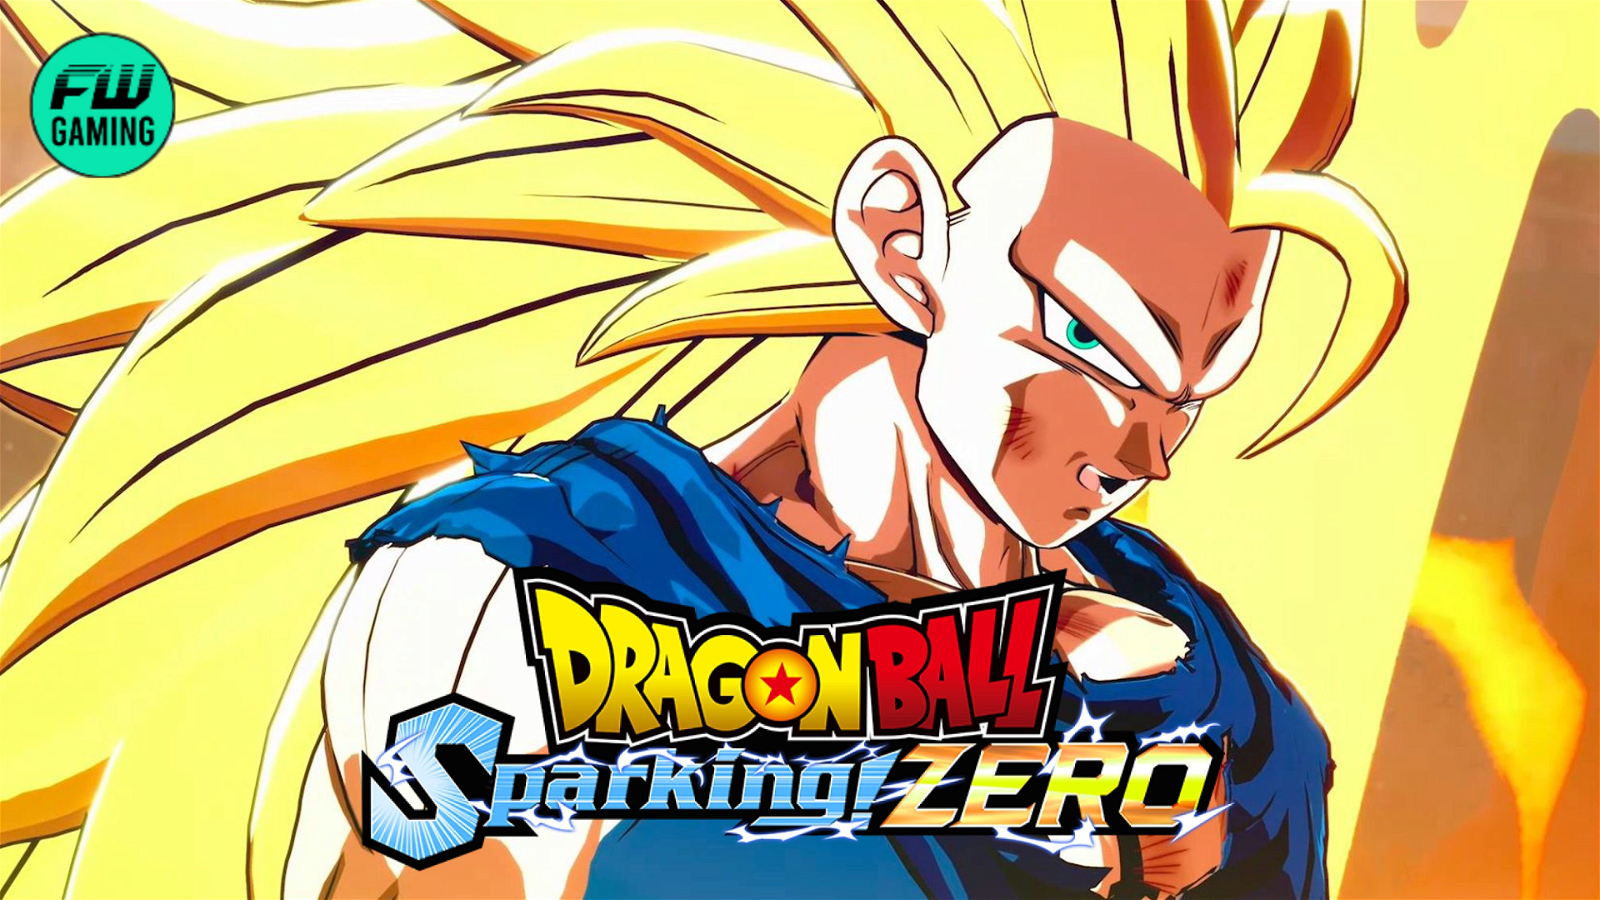 These 4 Details Prove Dragon Ball: Sparking Zero May Be the Biggest, Best, and Most Faithful Adaptation of the Anime and Manga You Can’t Afford to Miss Out on